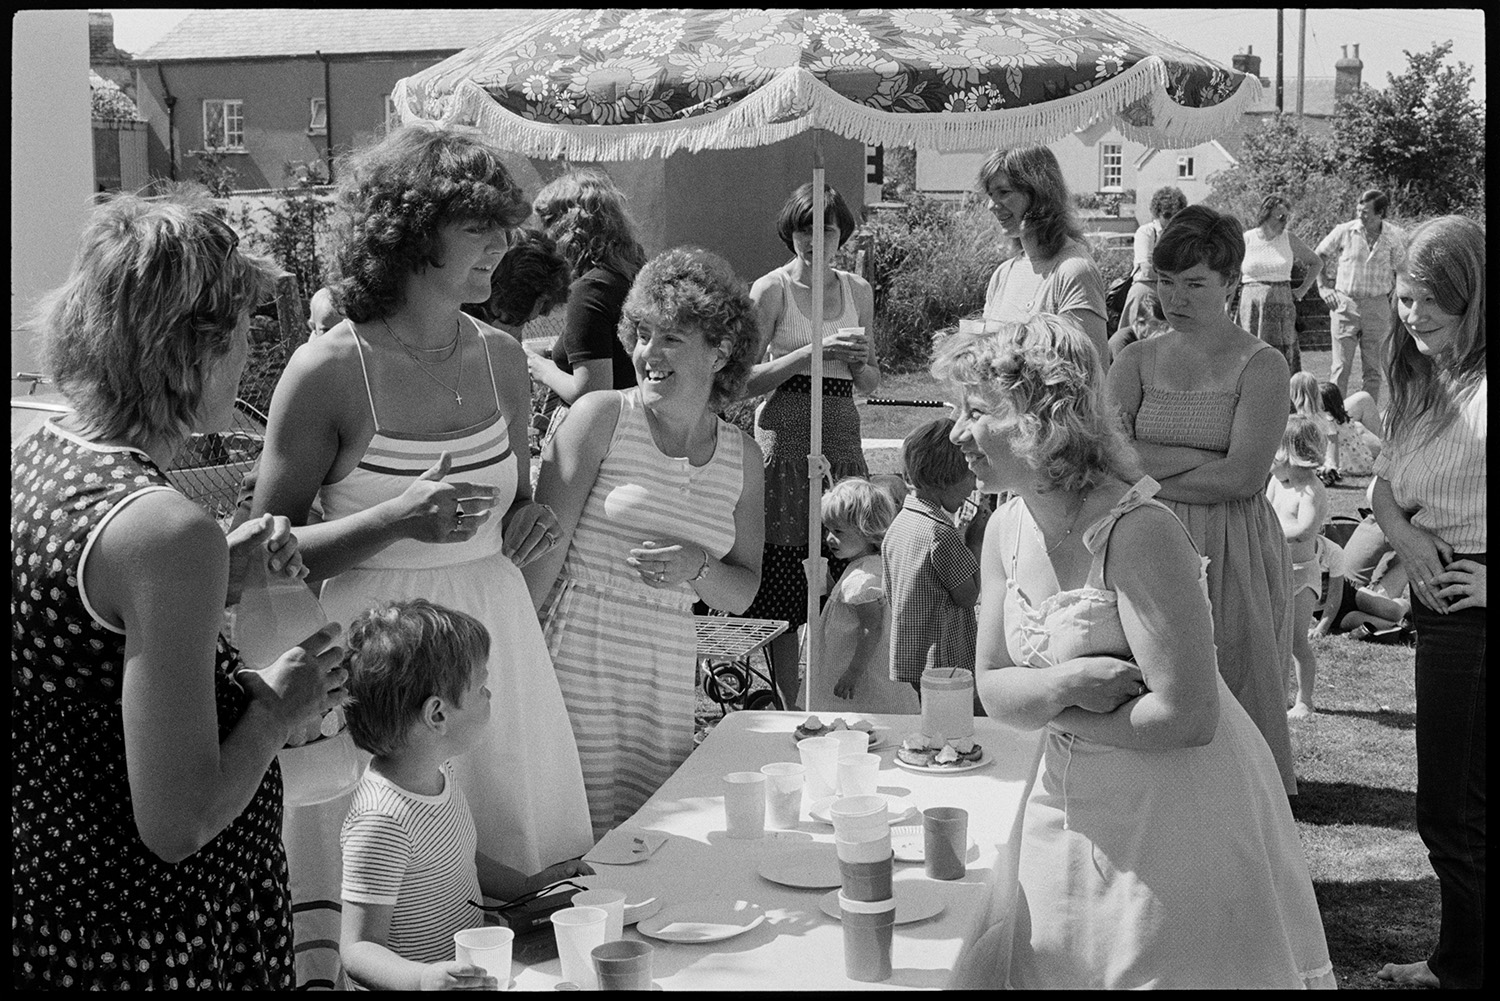 Sports day, women mothers with babies, children chatting and serving refreshments.
[A group of women and children chatting around a parasol covering a refreshment table at Dolton Sports Day.]